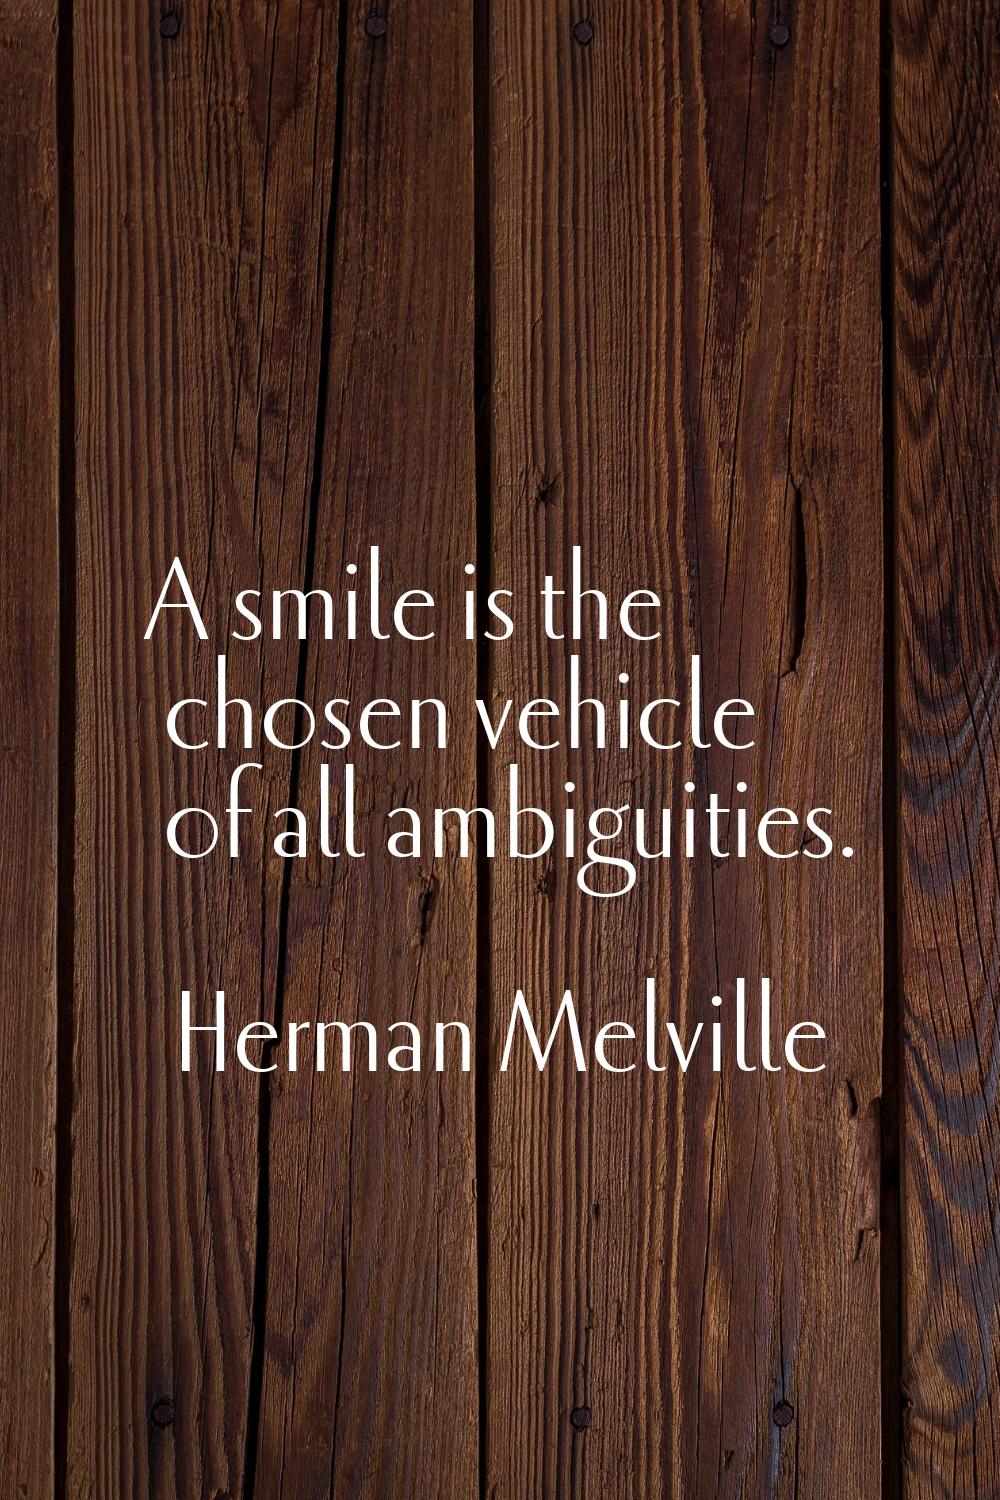 A smile is the chosen vehicle of all ambiguities.